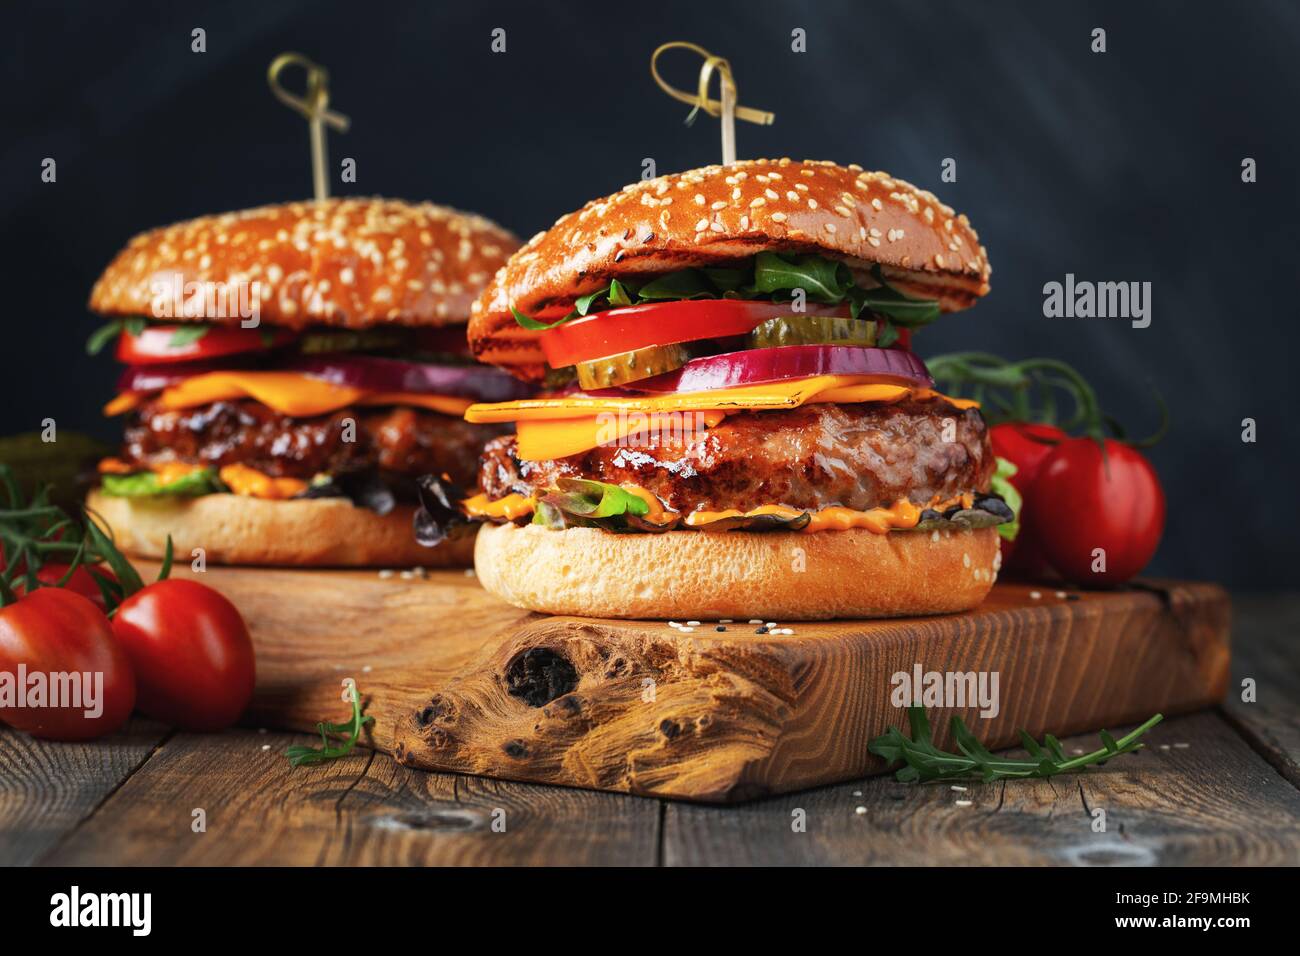 Two delicious homemade burgers of beef, cheese and vegetables on an old wooden table. Fat unhealthy food close-up Stock Photo